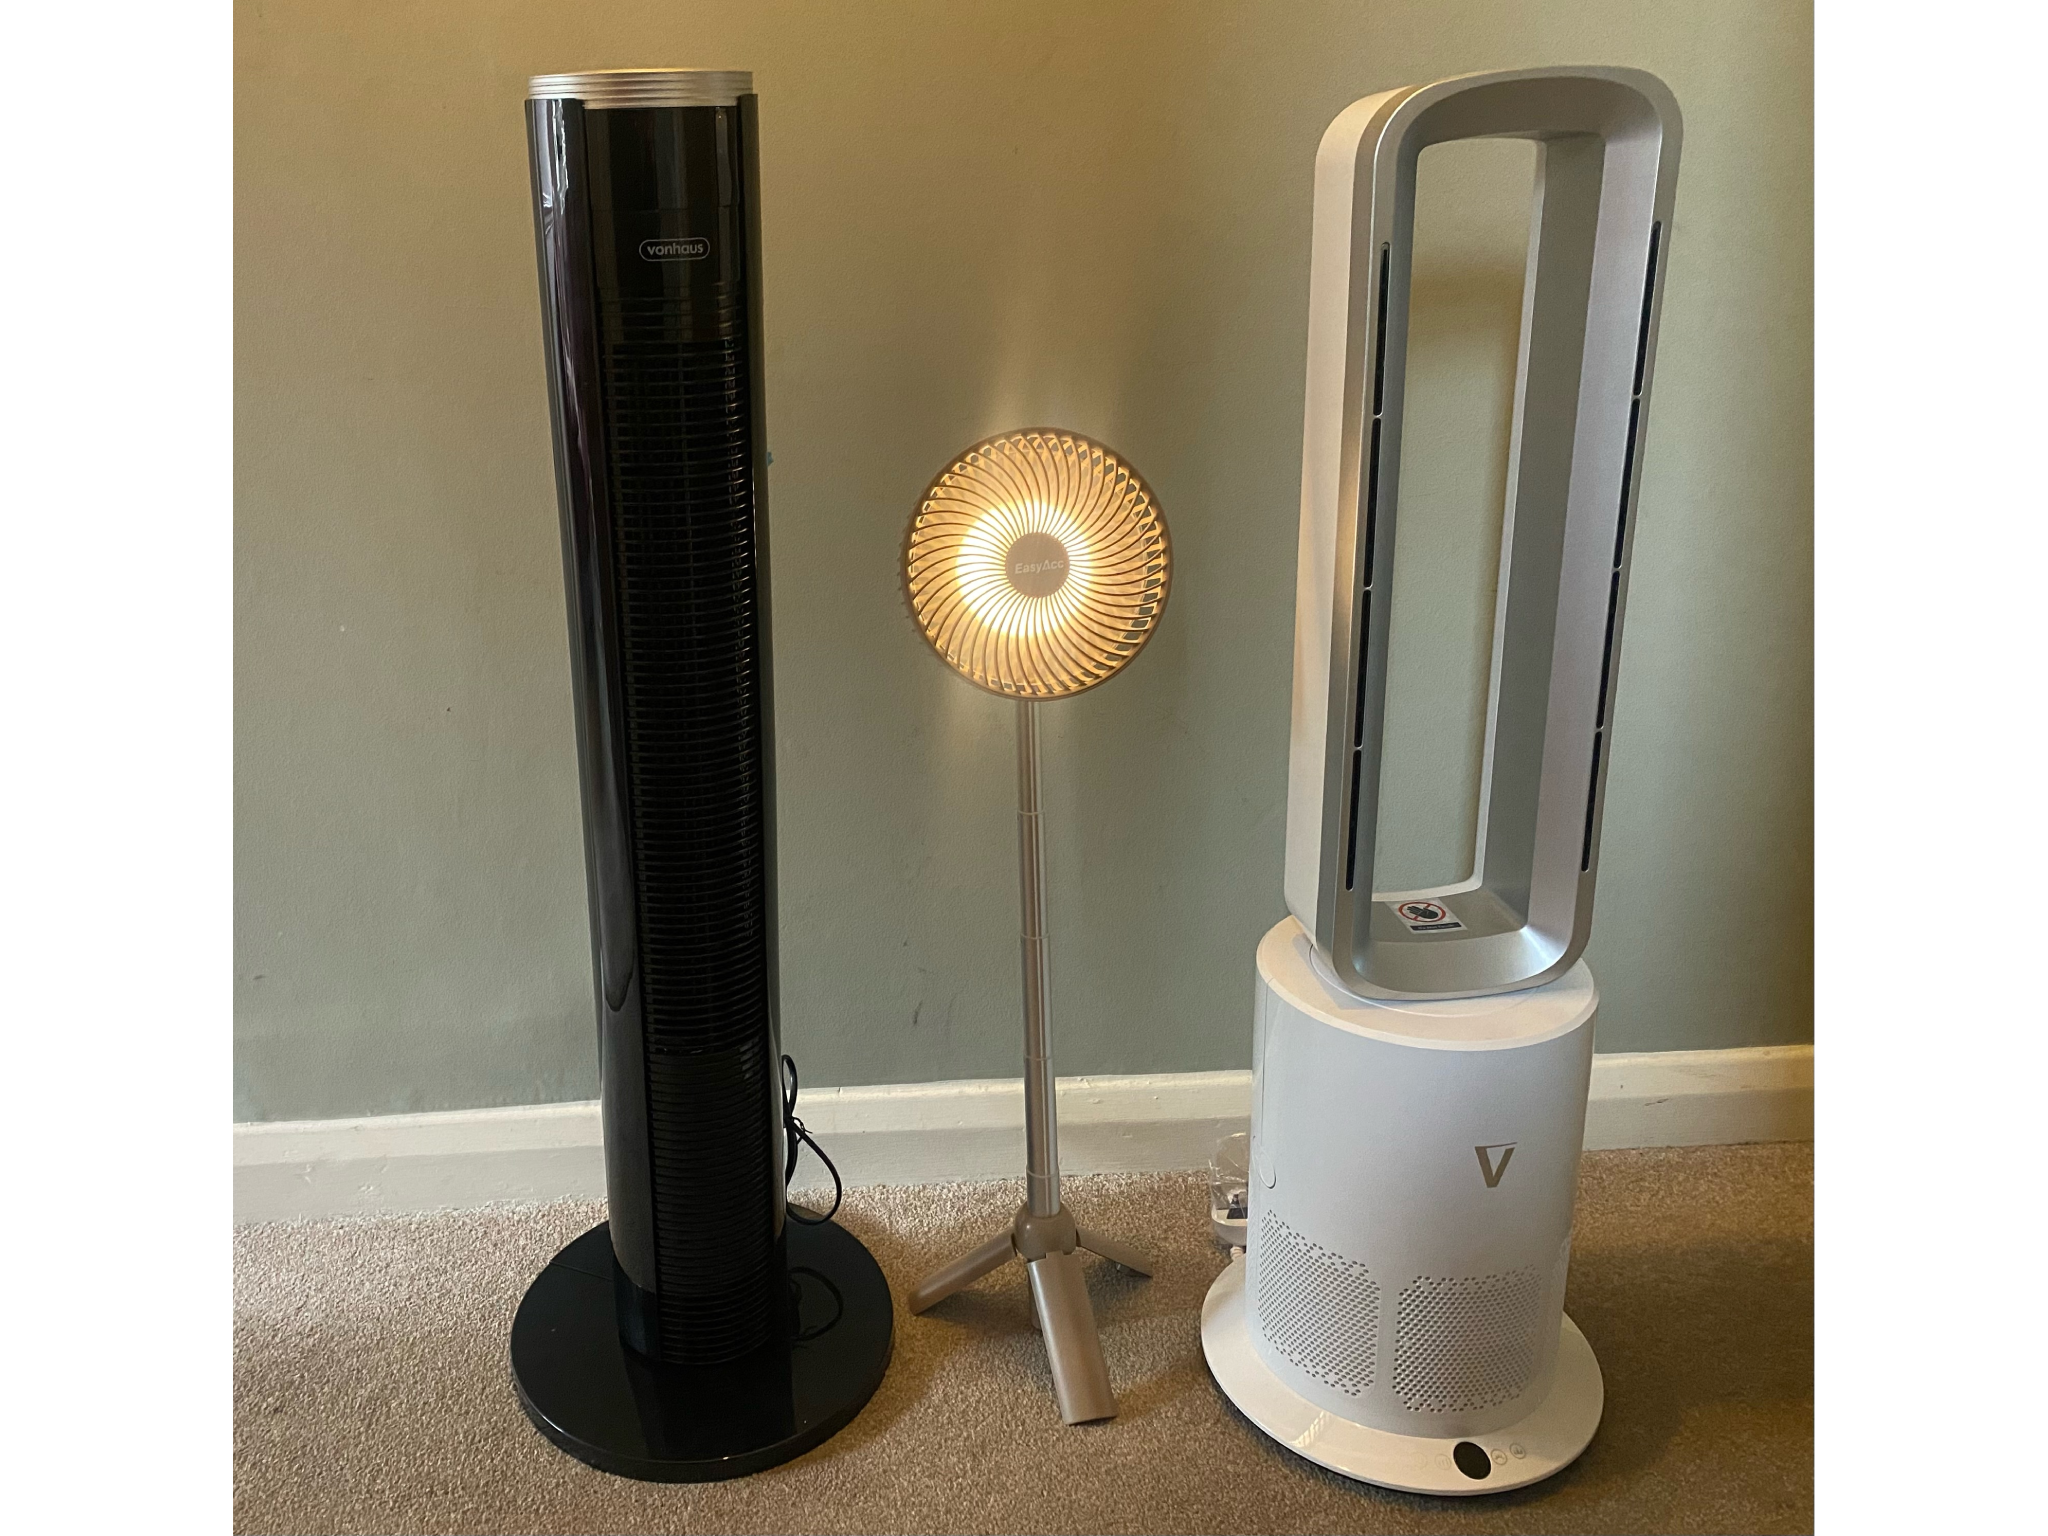 A selection of the best fans that we tested for this review